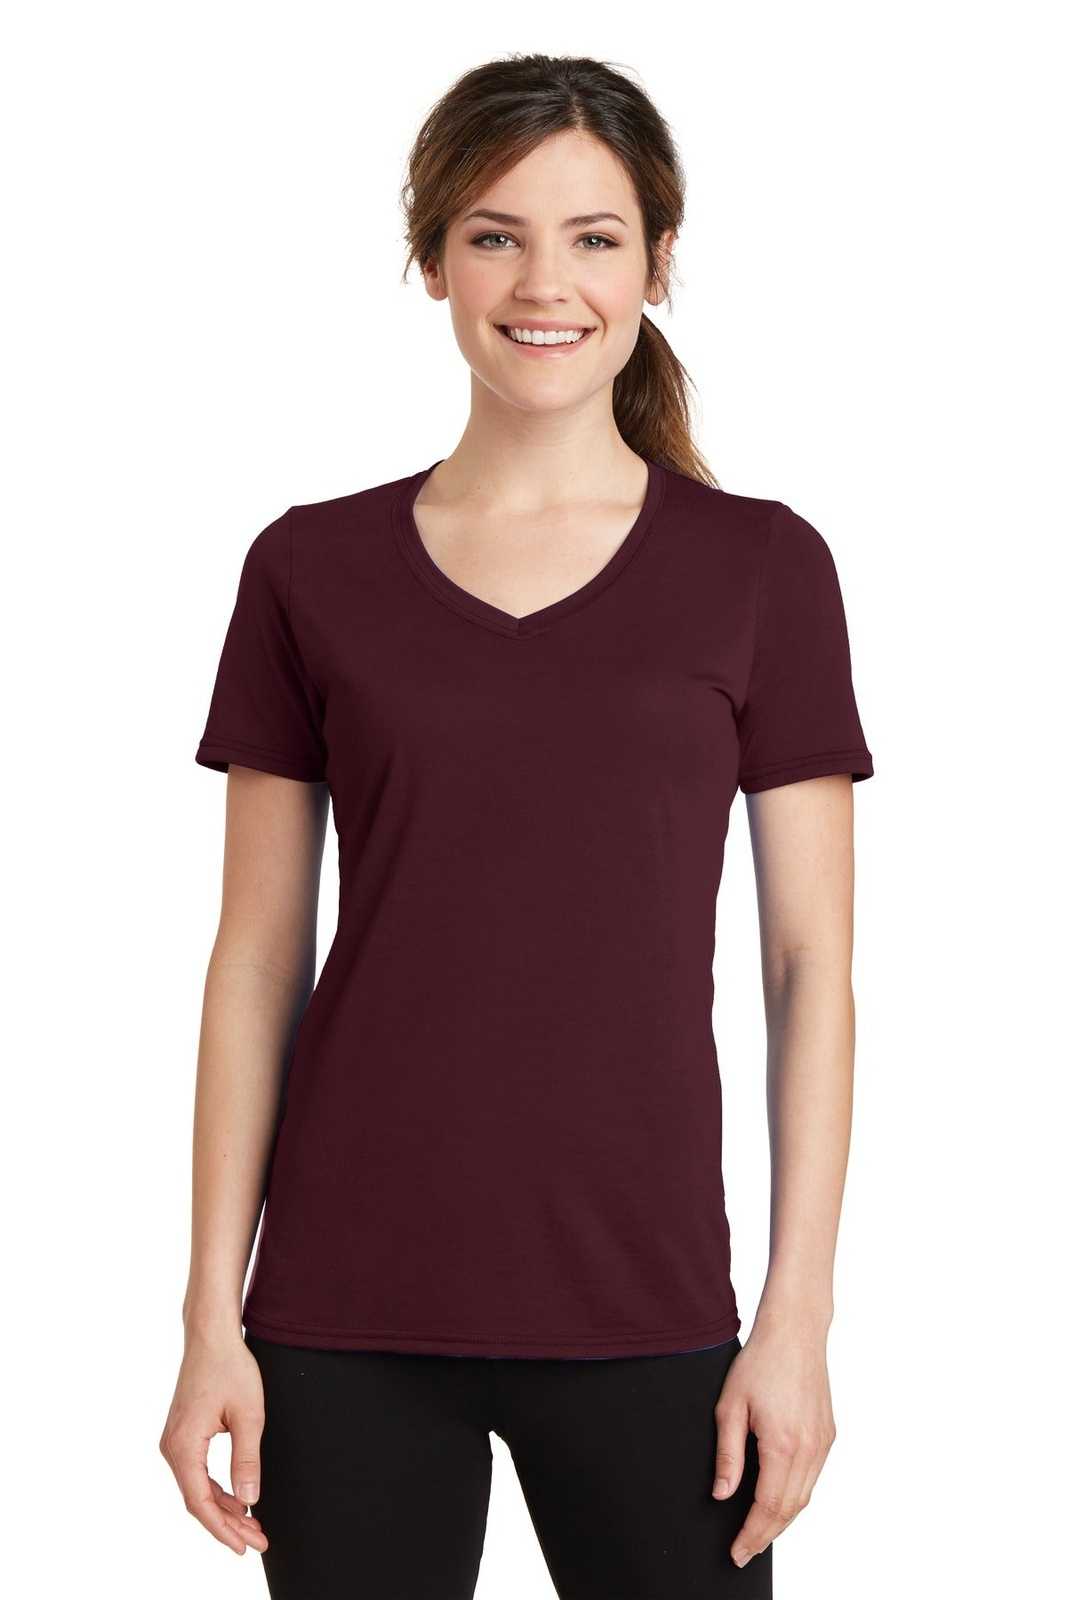 Port &amp; Company LPC381V Ladies Performance Blend V-Neck Tee - Athletic Maroon - HIT a Double - 1